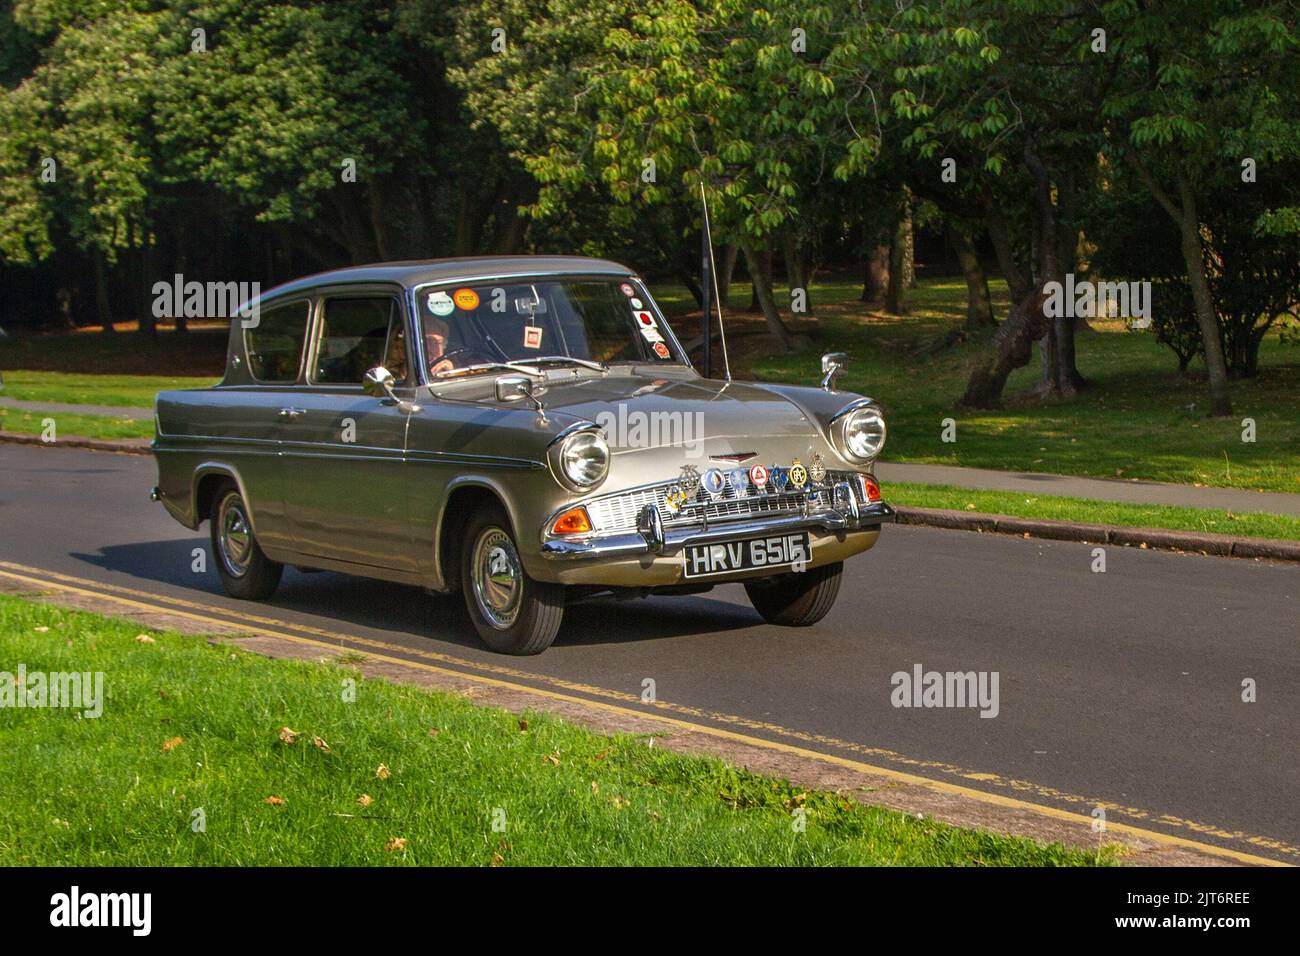 1967 60s anni sessanta, prefetto Super 1197cc benzina Gold FORD; arrivo all'annuale Stanley Park Classic Car Show nei Giardini Italiani. Stanley Park Classics Yesteryear Motor Show Hosted by Blackpool Vintage Vehicle Preservation Group, UK. Foto Stock